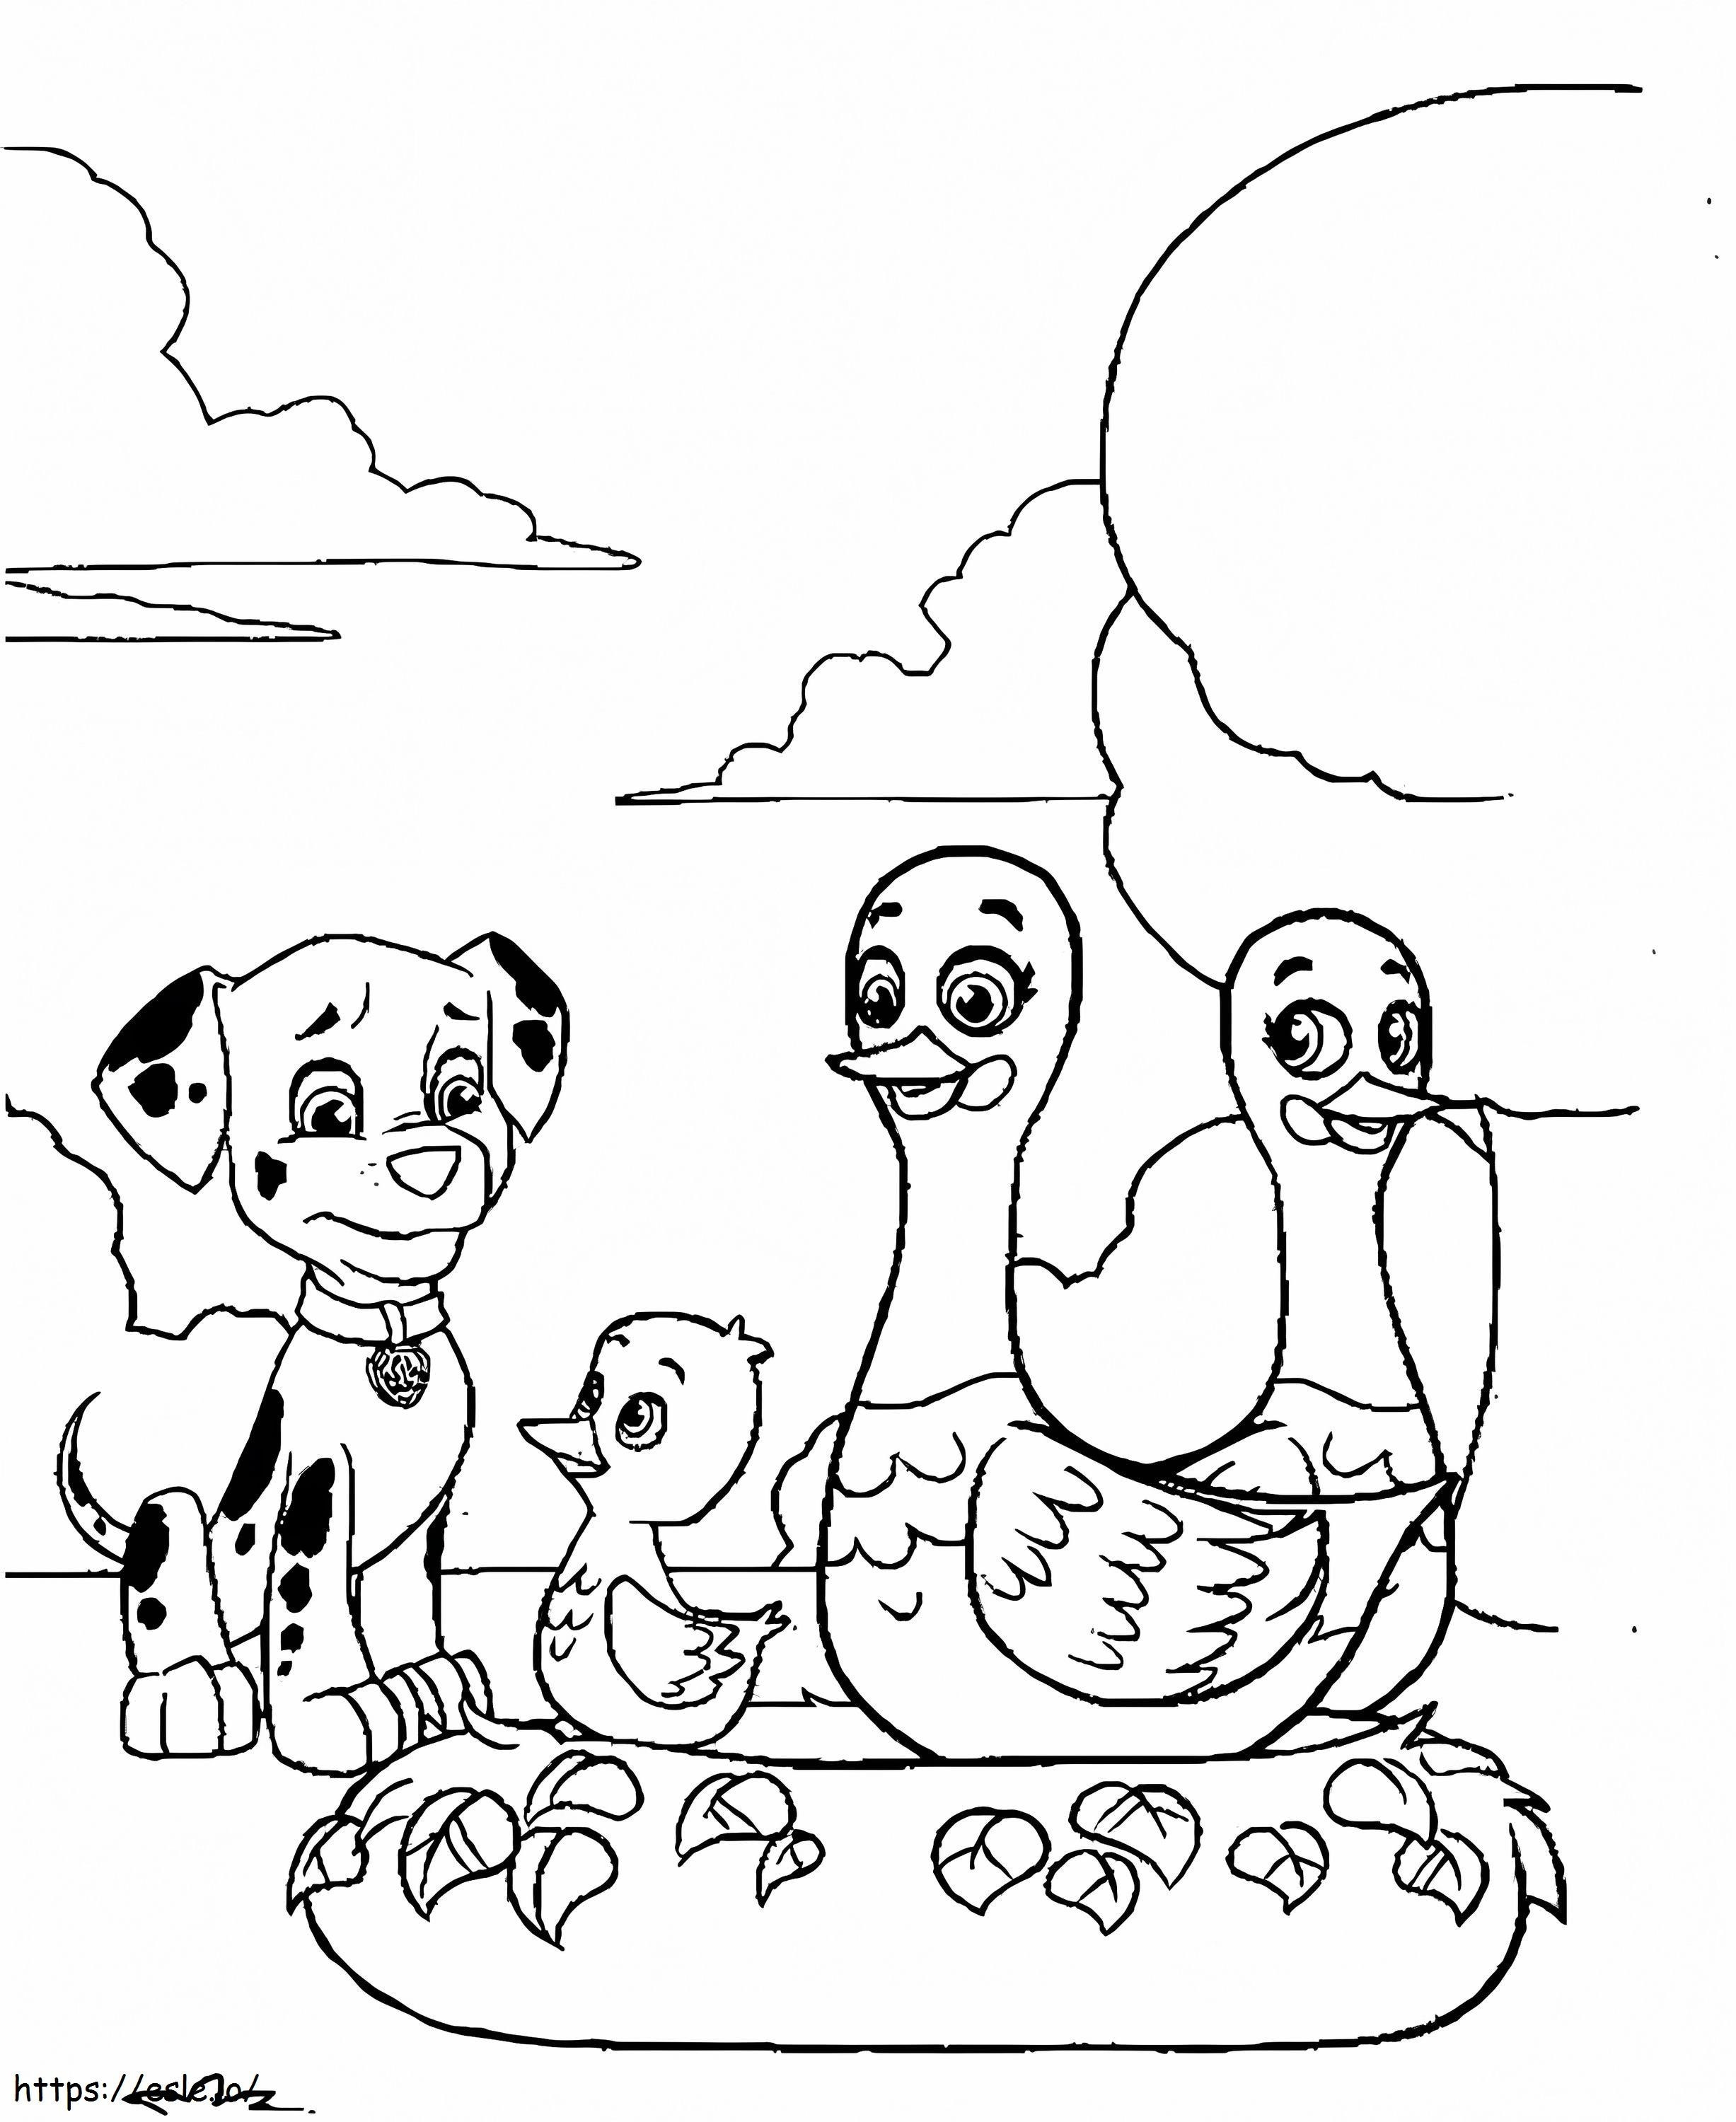 Paw Patrol Marshall With Duck coloring page